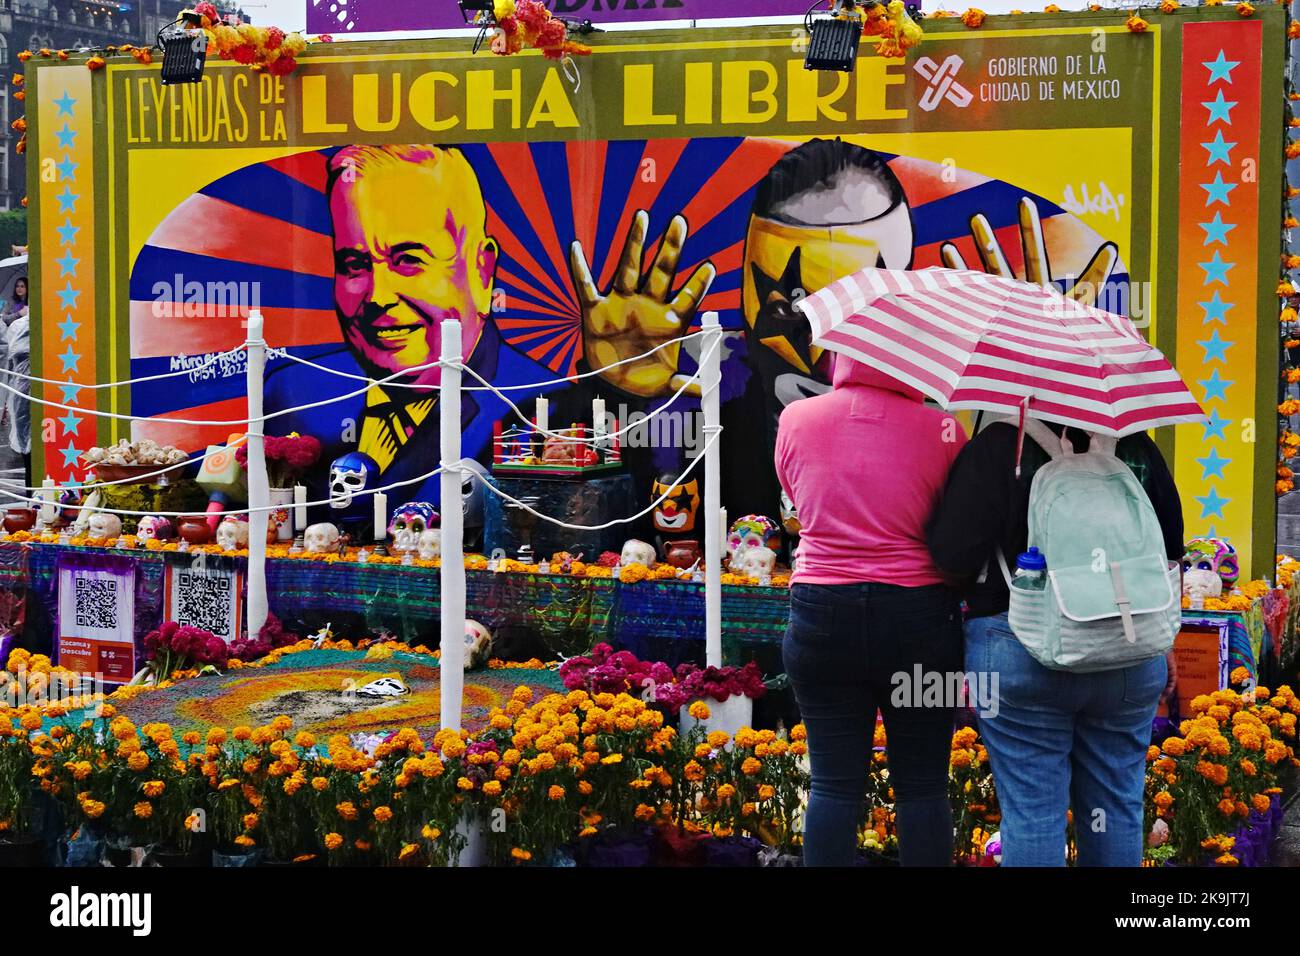 Mexico City, Mexico. 28th Oct, 2022. Two people hide under and umbrella during an afternoon thunderstorm as they view a Ofrenda or altar honoring Mexican wrestling during the Megaofrenda of Zocalo festival to celebrate the start of the Day of the Dead holiday at the Plaza de la Constitucion, October 28, 2022 in Mexico City, Mexico. Credit: Richard Ellis/Richard Ellis/Alamy Live News Stock Photo